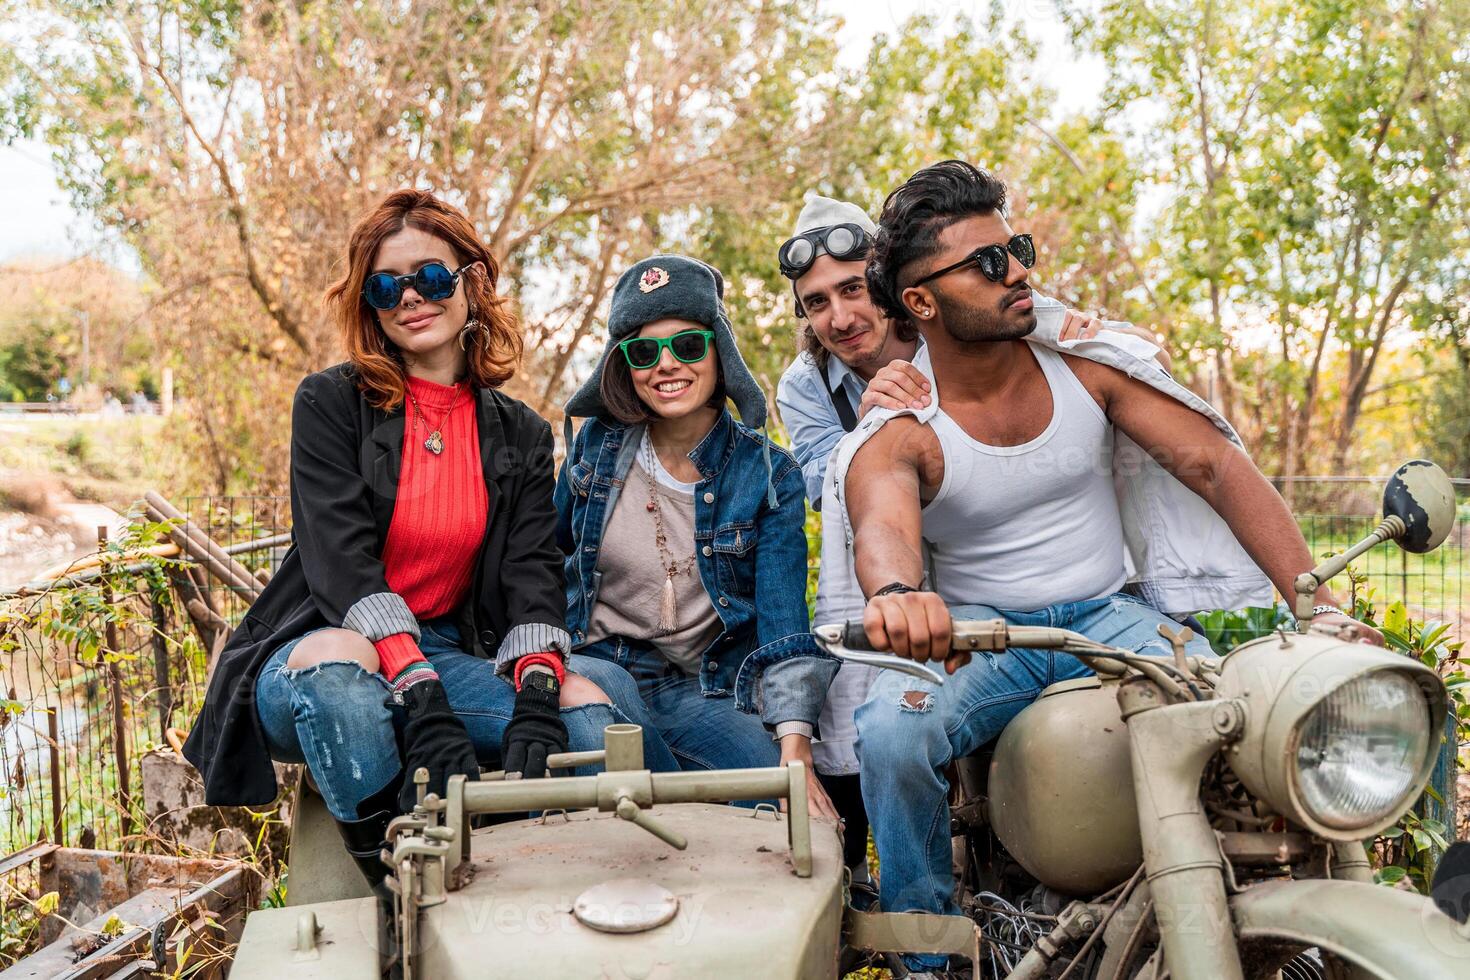 group of best friends together have fun riding a vintage motorcycle with sidecar photo